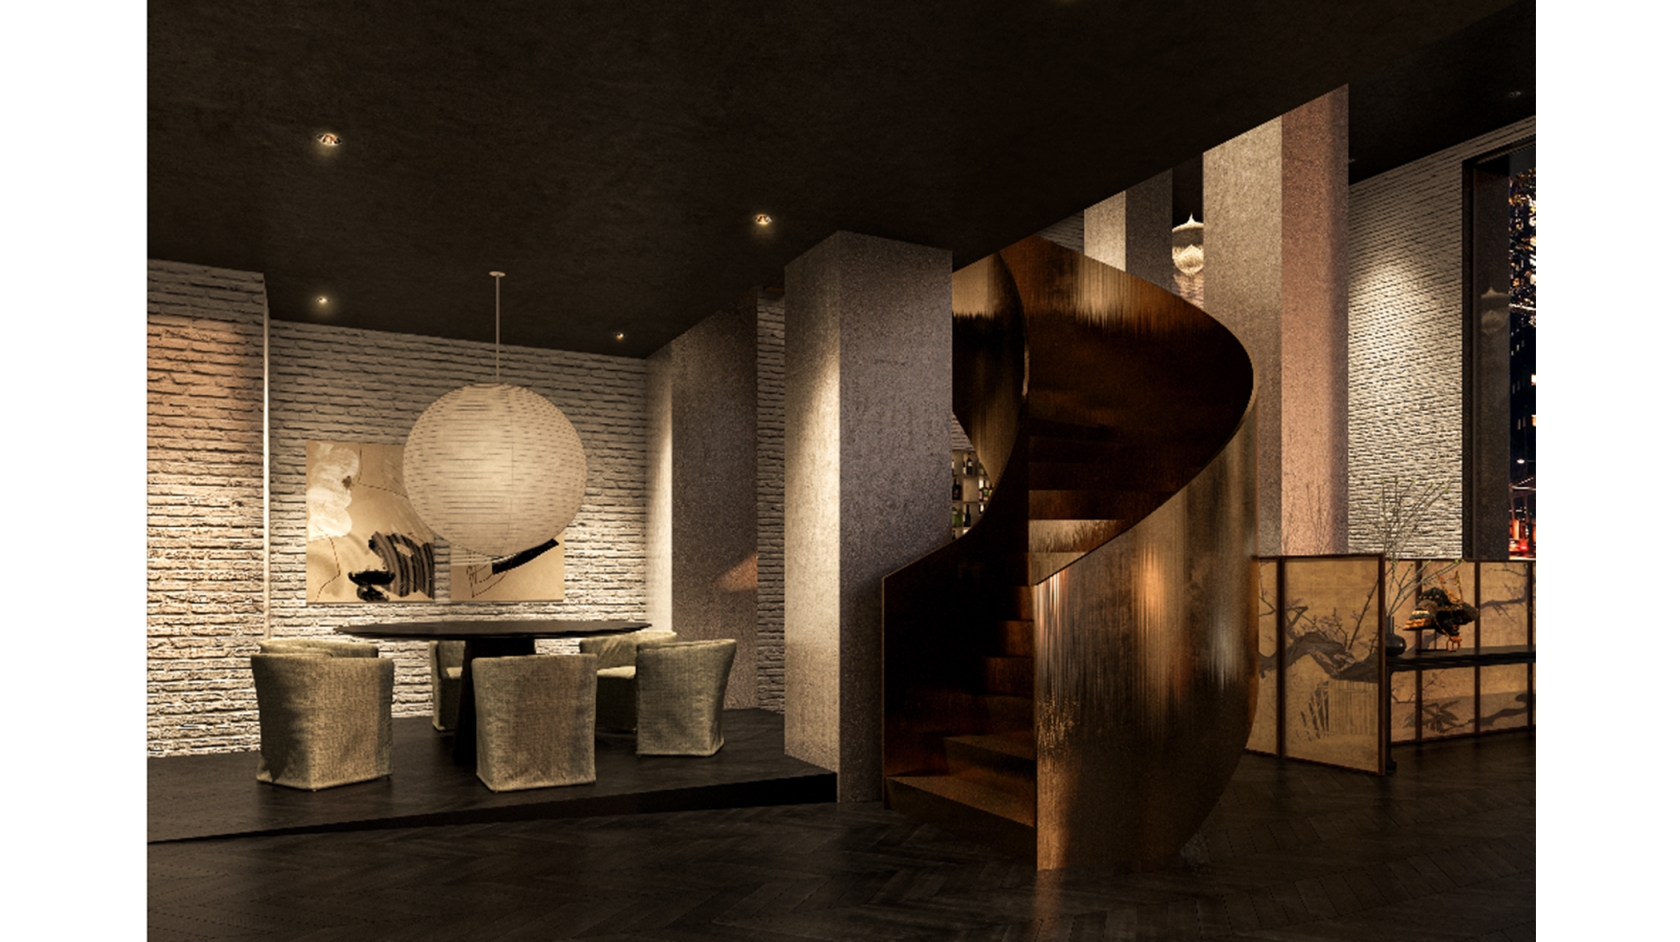 Hotel AKA NoMad interior with a modern circular stairway and cozy seating area